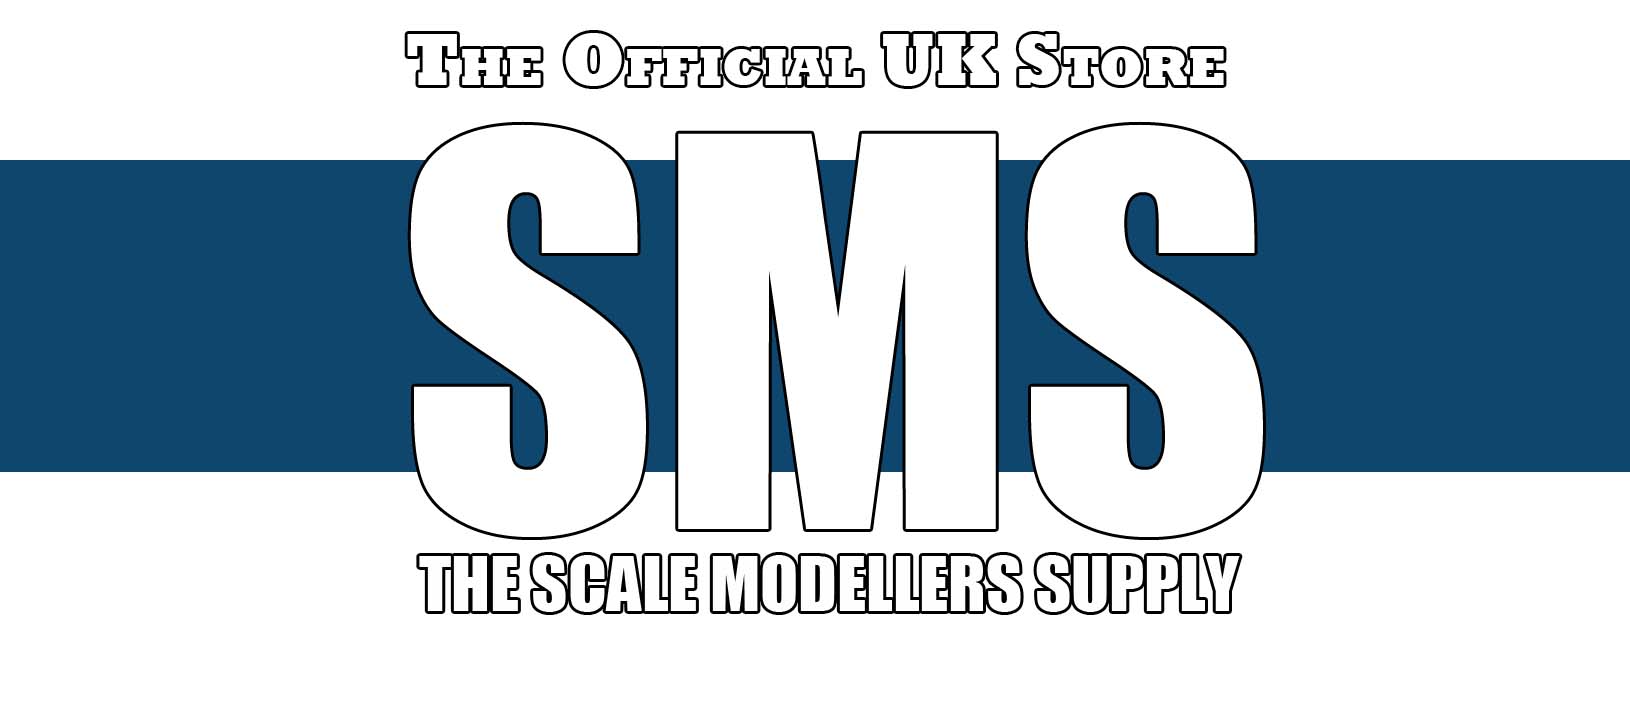 The Scale Modellers Supply UK